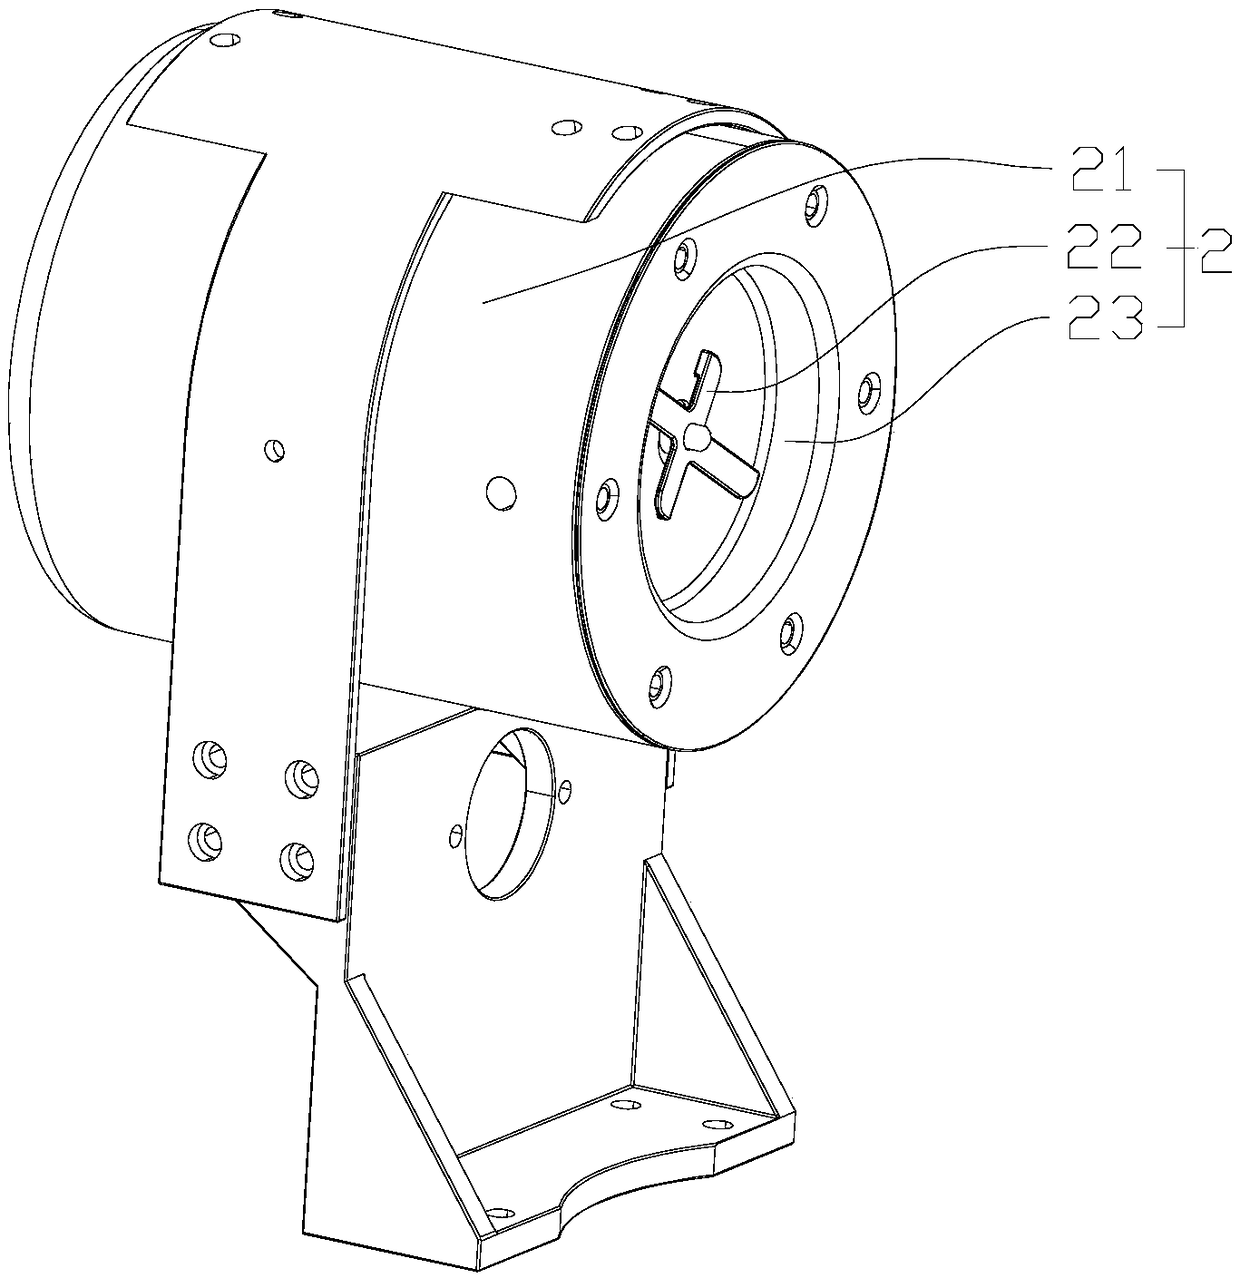 Small ultrafine grinder with self-cleaning mechanism